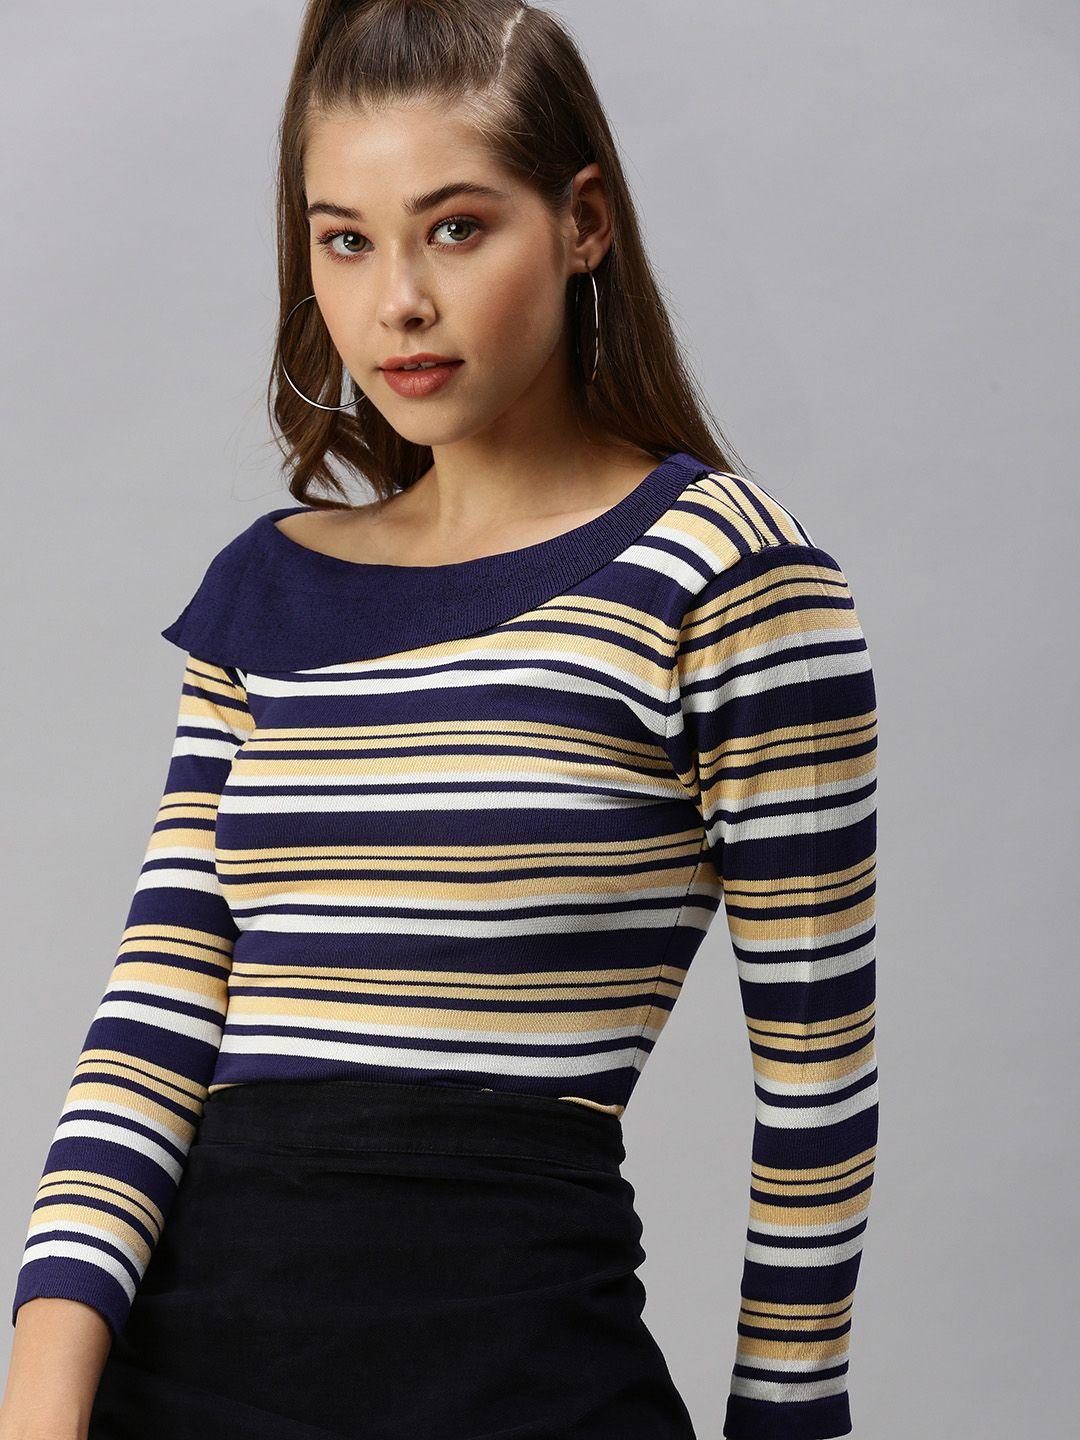 showoff navy blue striped top